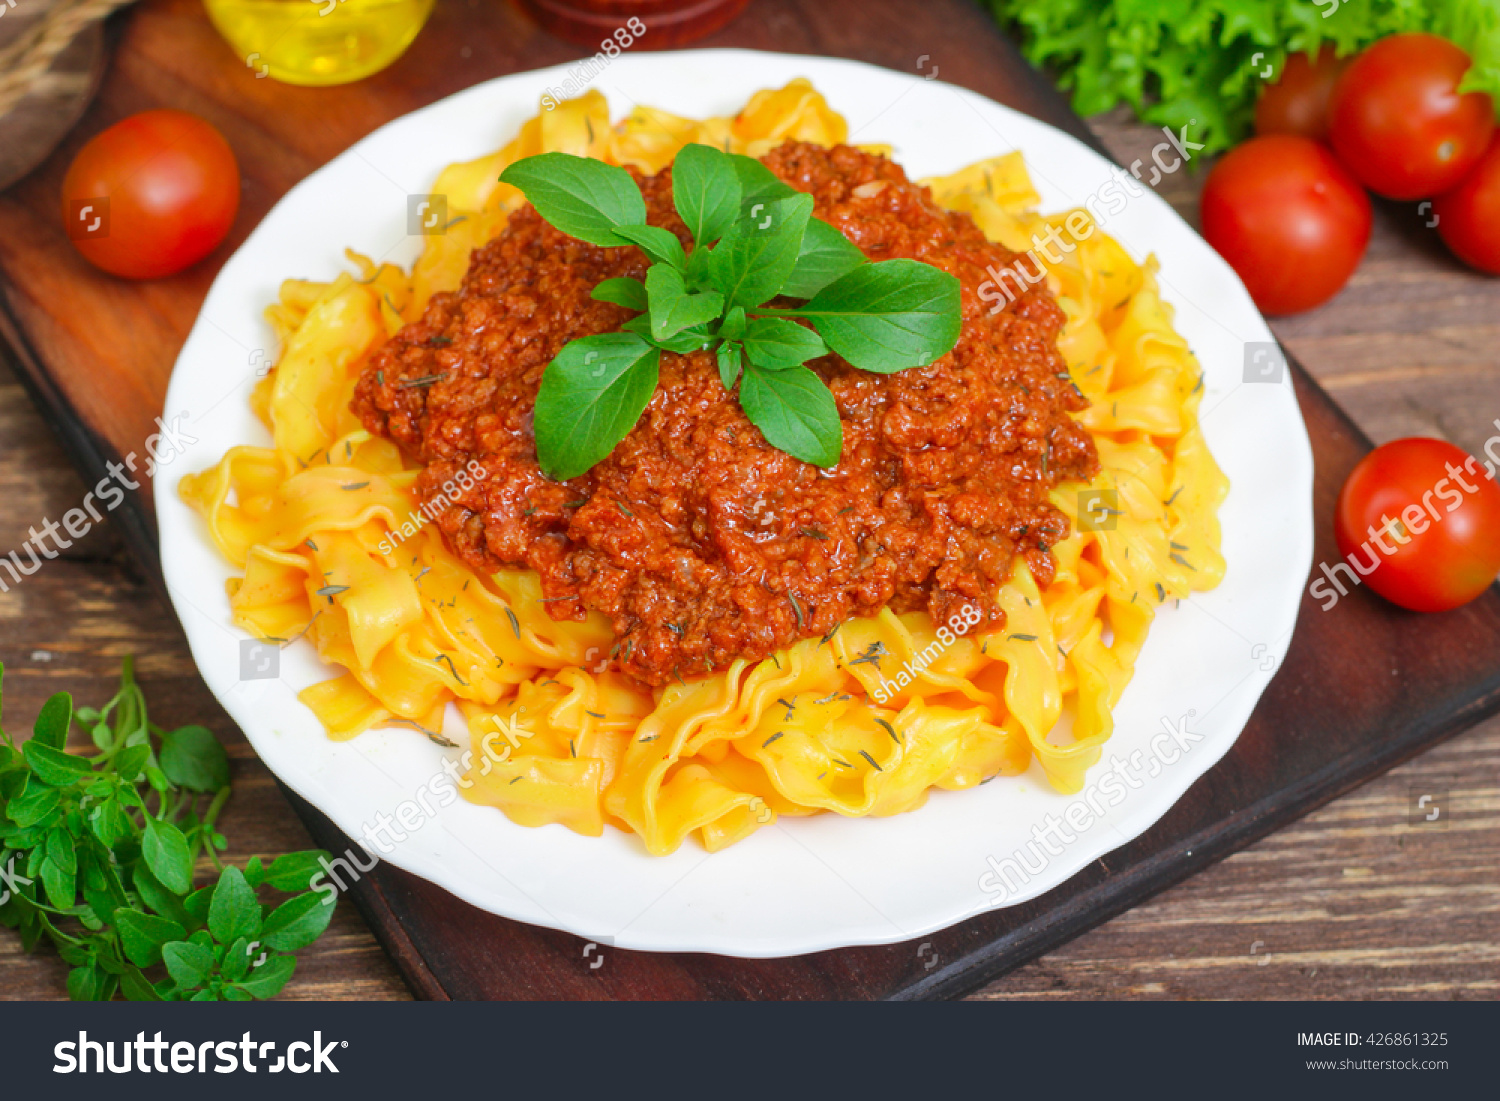 Traditional Italian pasta Bolognese or Bolognese with cooked pasta noodles topped with a spicy tomato based meat sauce garnished with fresh basil on a wooden background #426861325